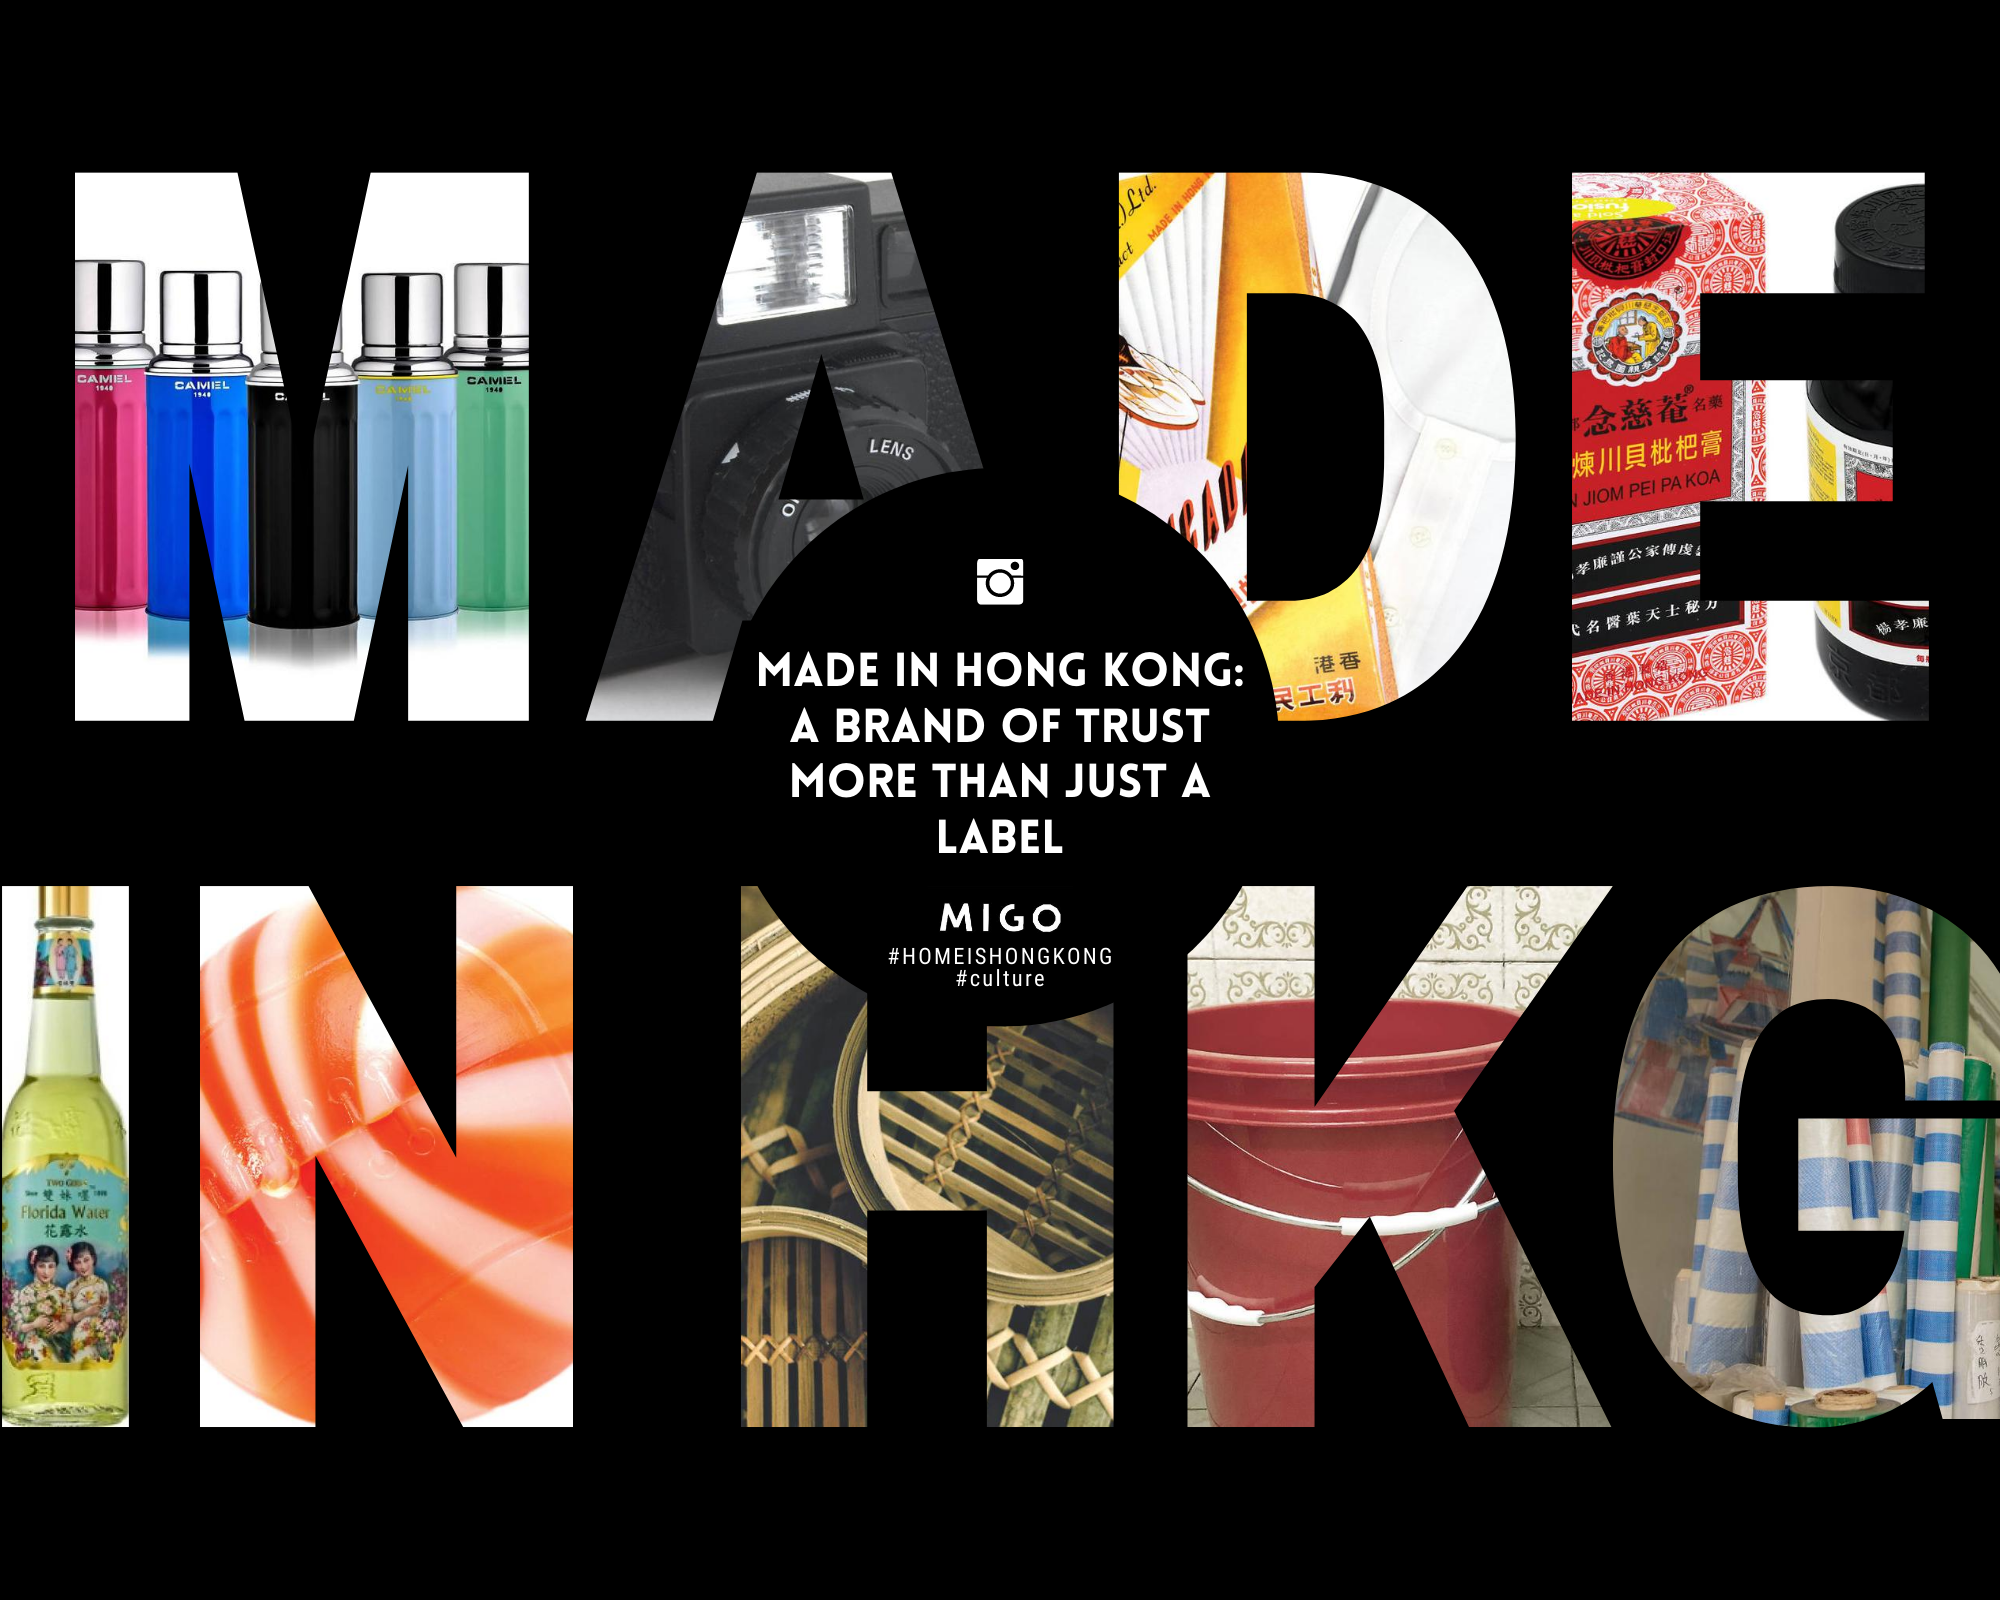 Made in Hong Kong: A Brand of Trust More Than Just A Label